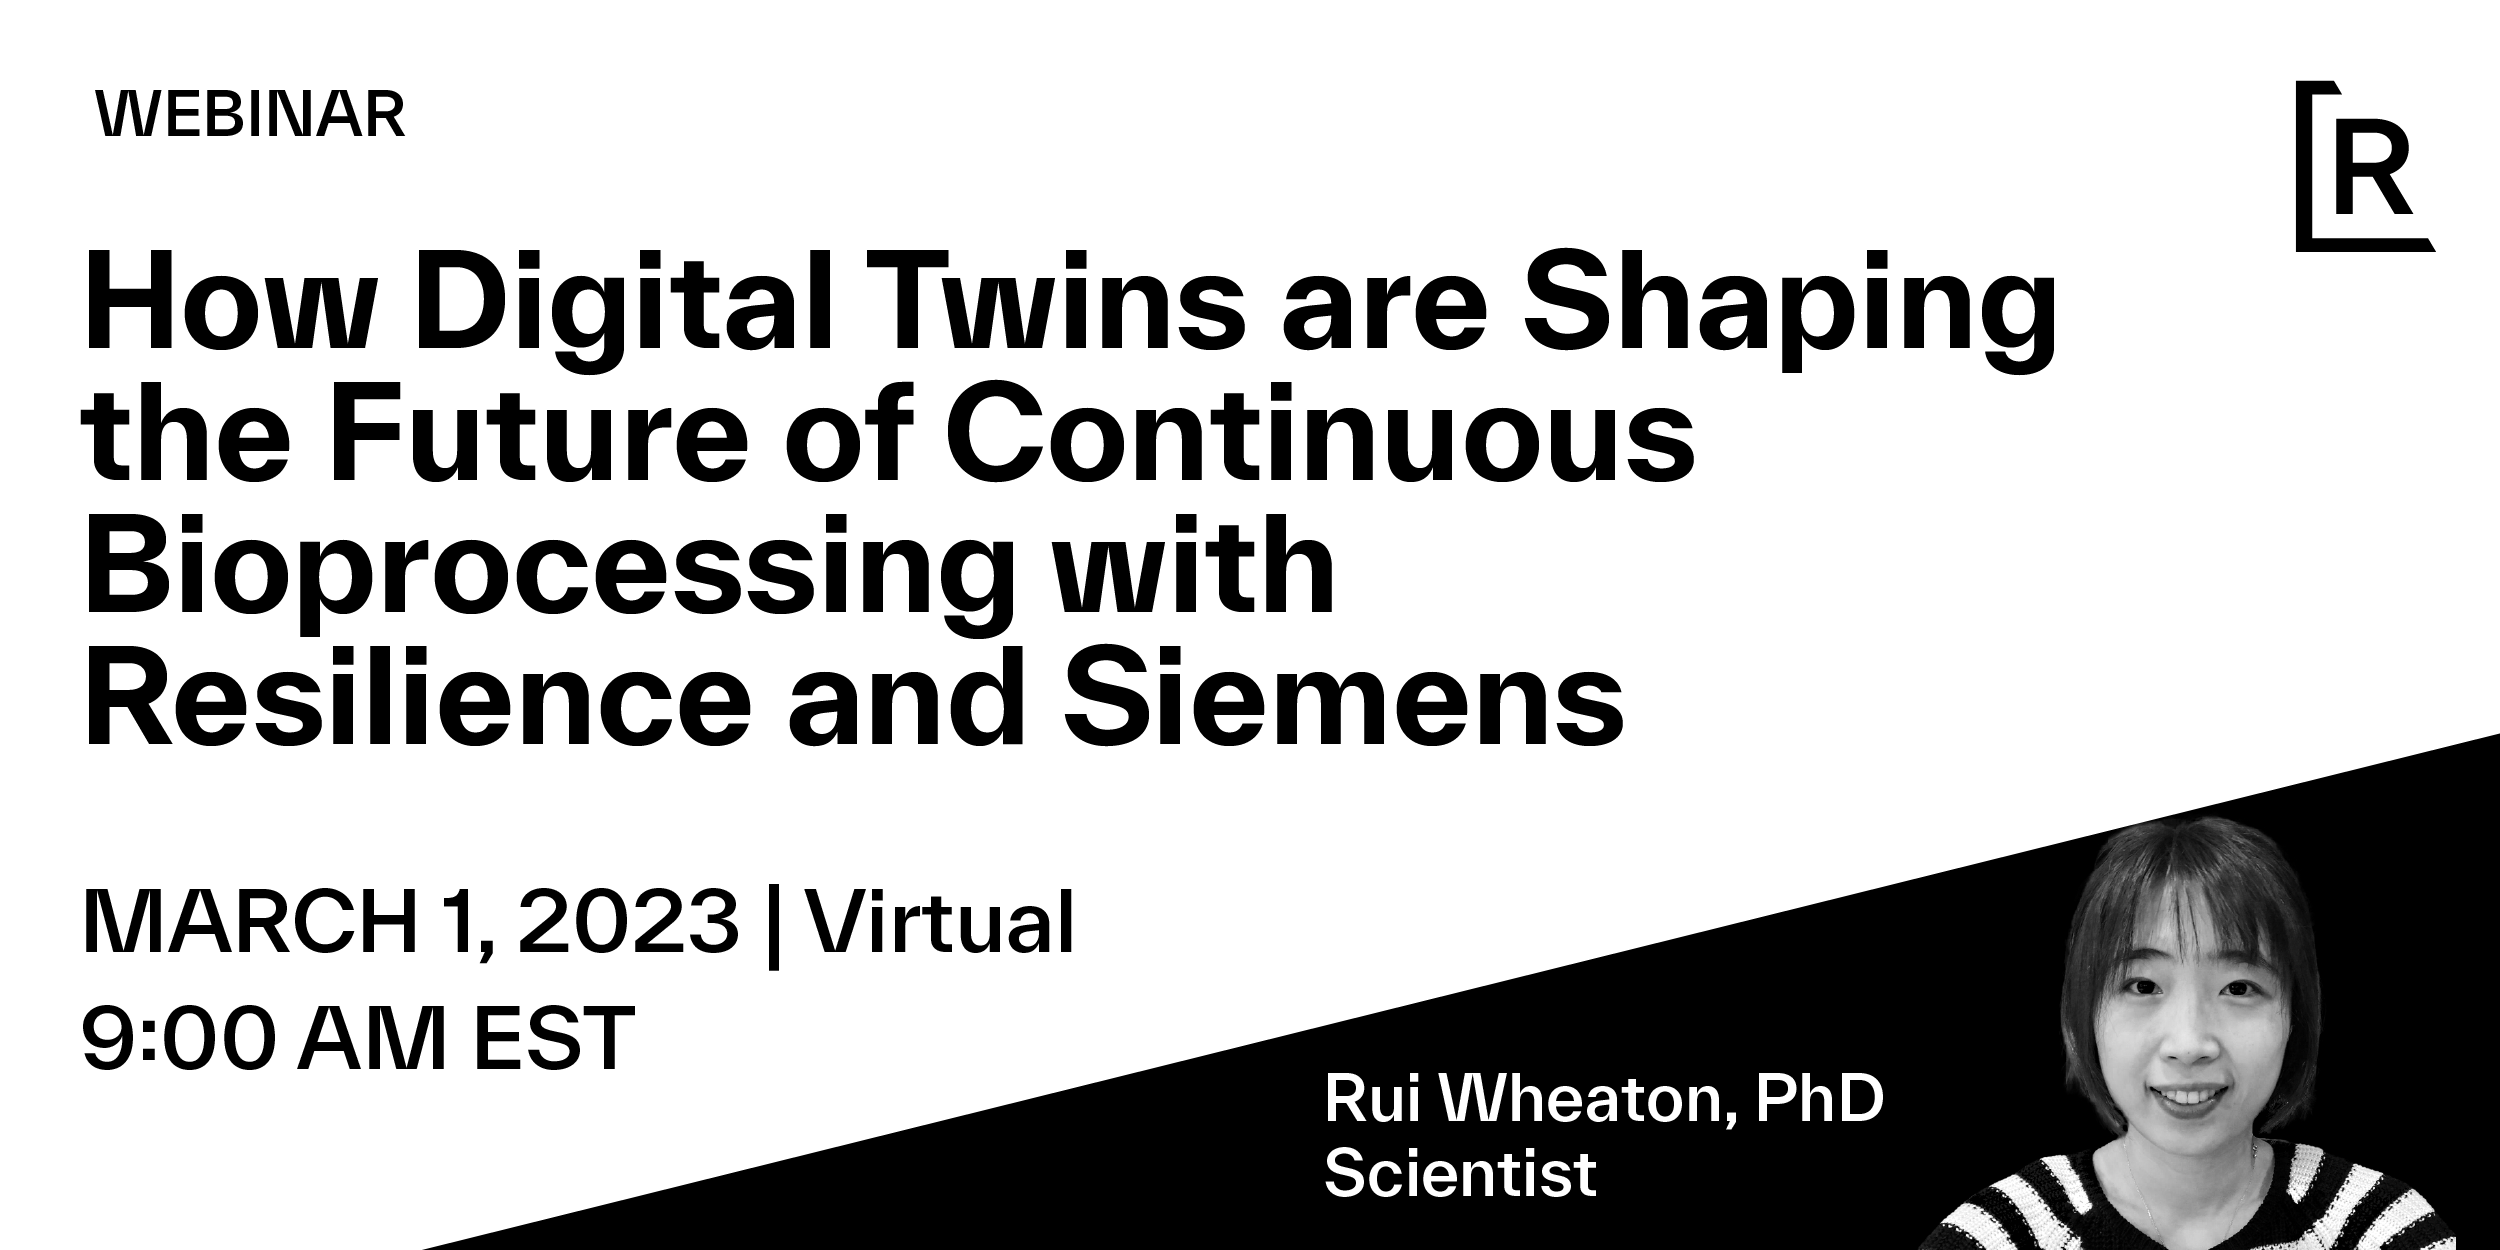 WEBINAR: How Digital Twins are Shaping the Future of Continuous Bioprocessing with Resilience and Siemens